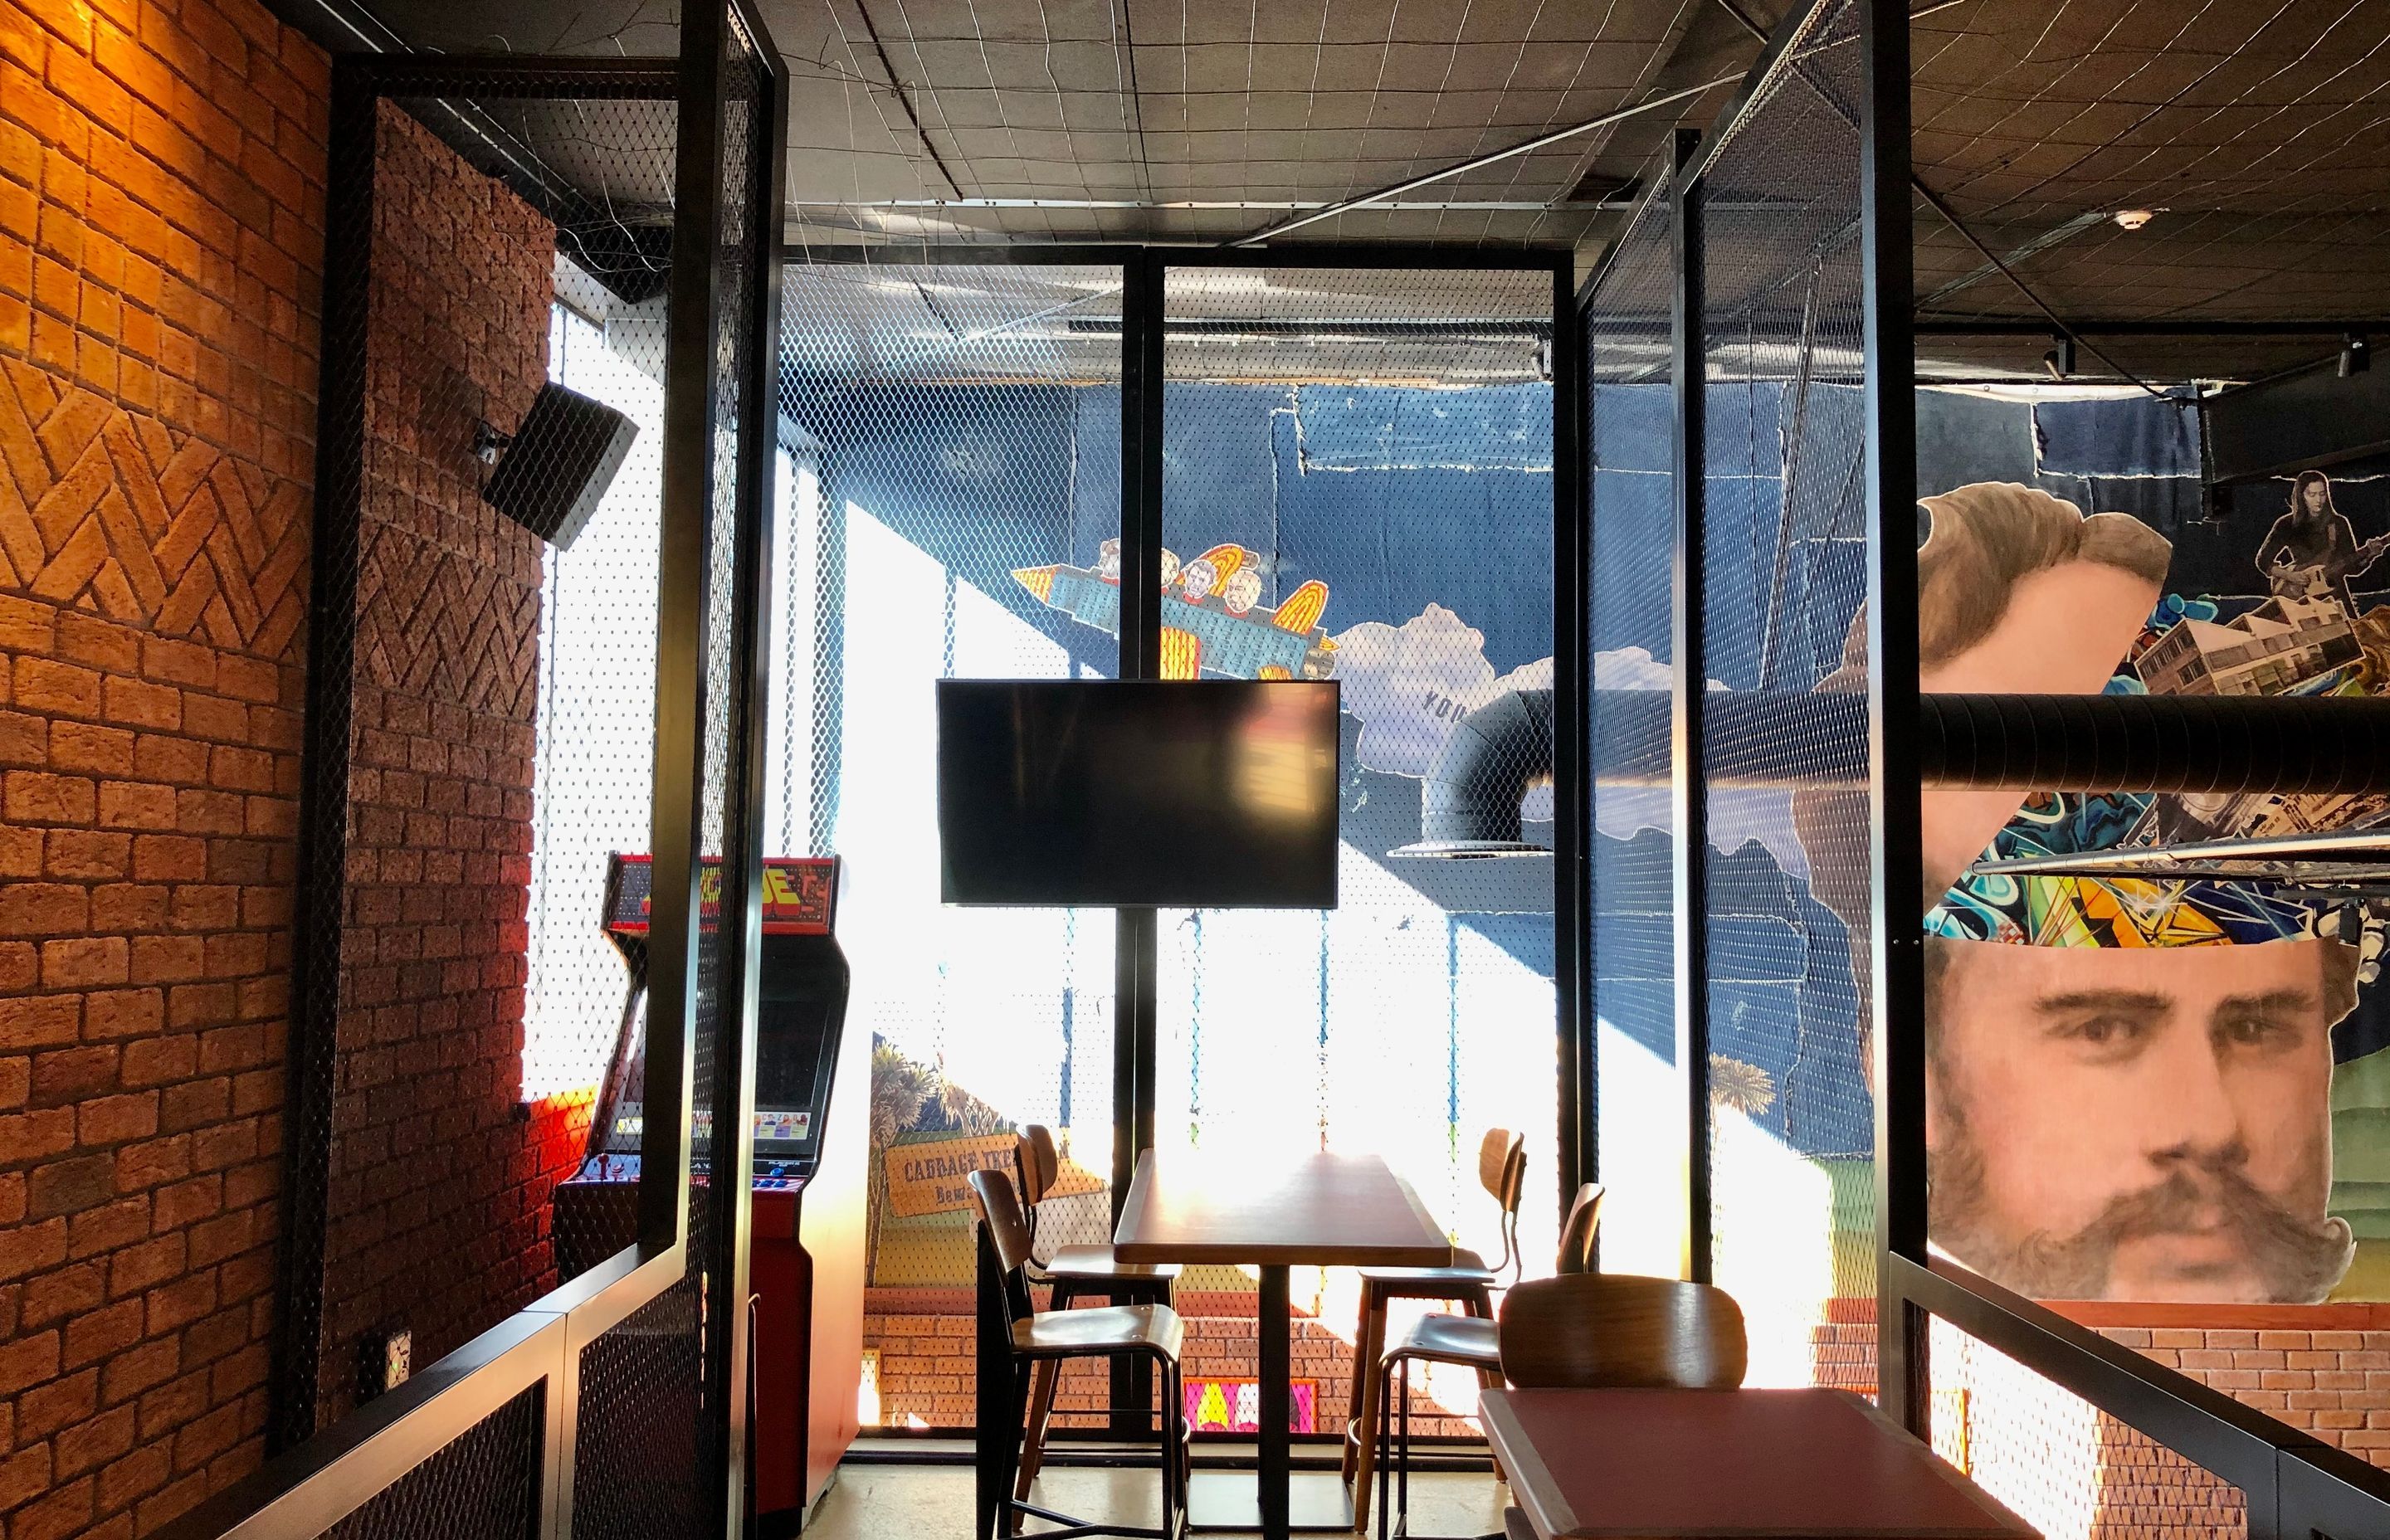 Morningside Tavern balustrades and mesh ceiling feature
